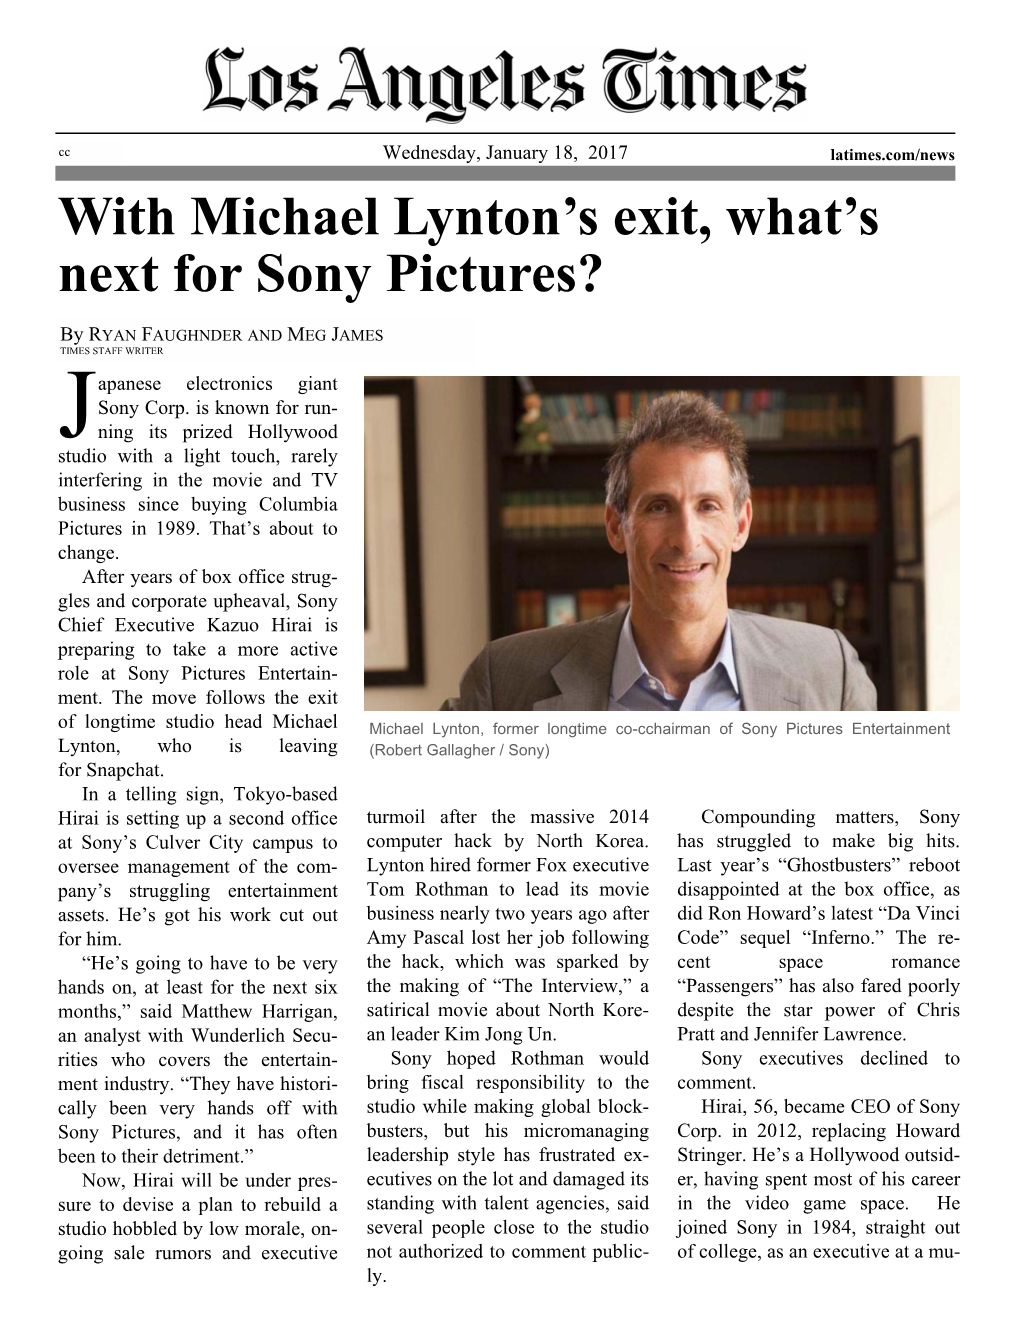 With Michael Lynton's Exit, What's Next for Sony Pictures?